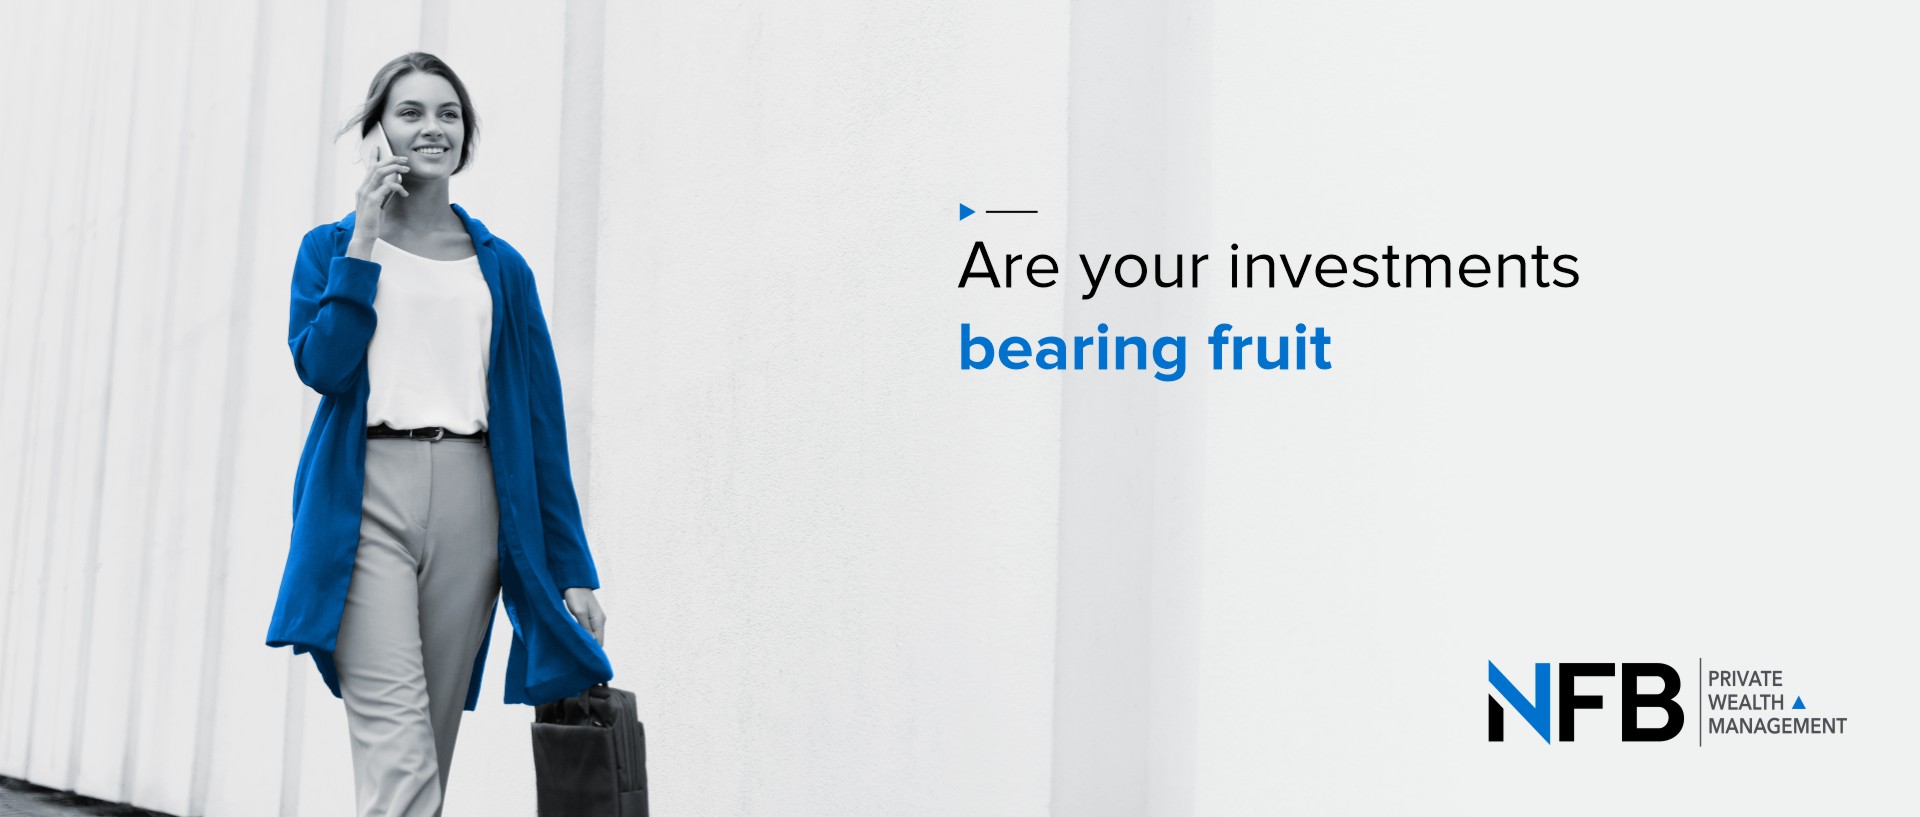 Are your investments bearing fruit?